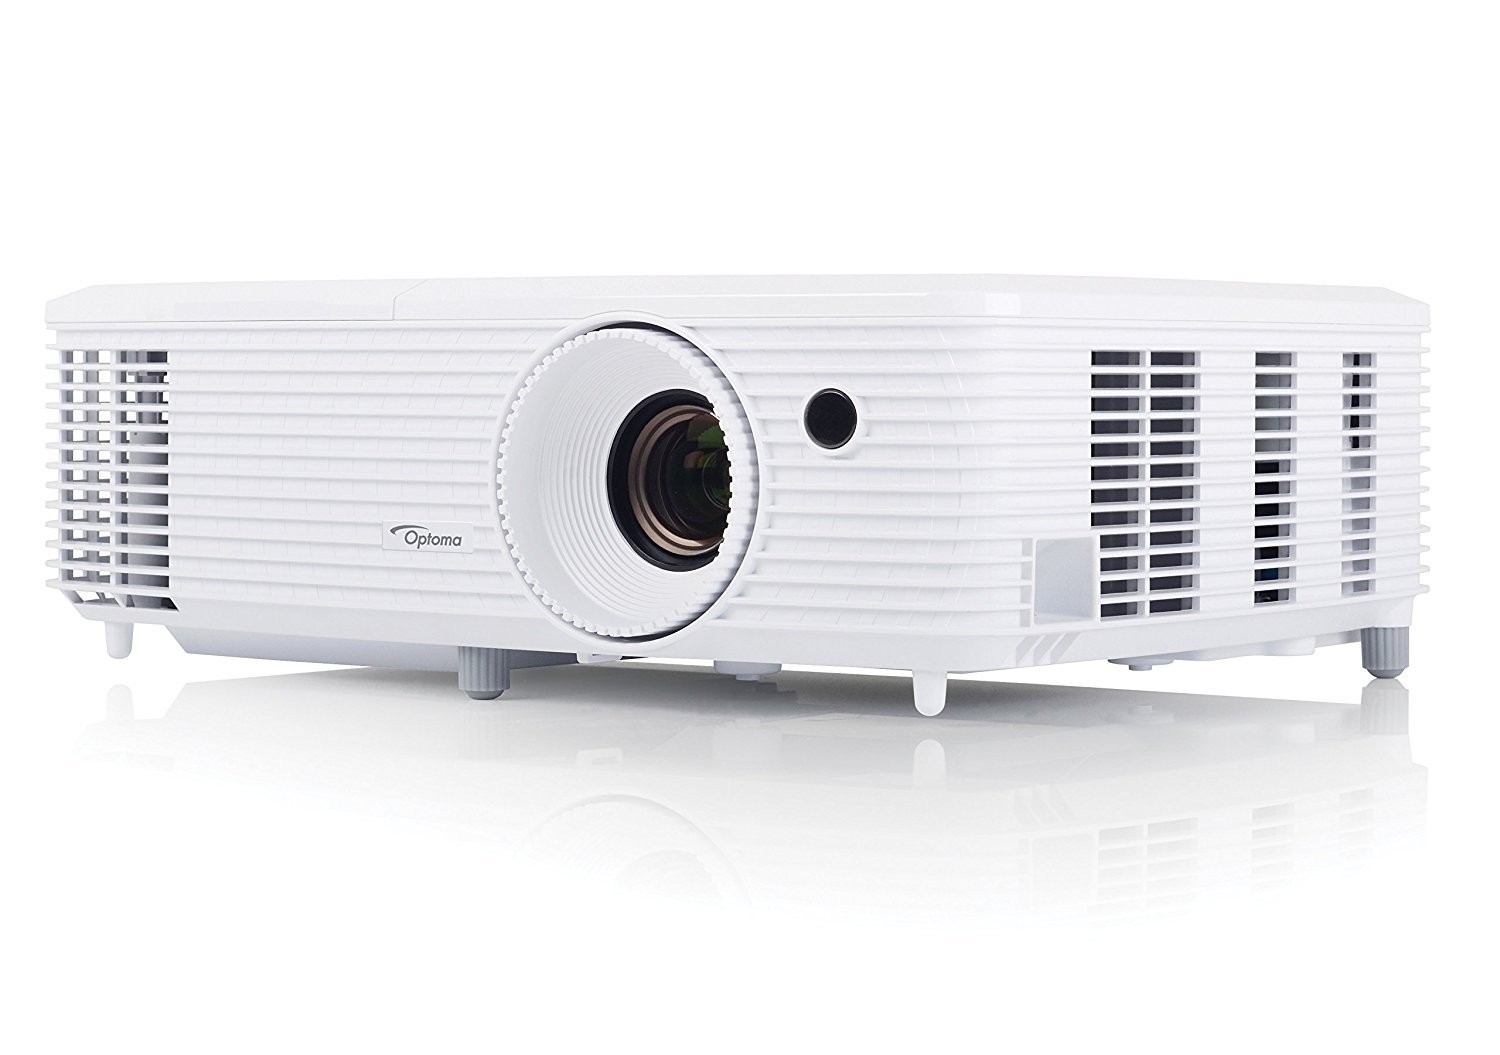 in-which-country-is-the-optoma-hd27-1080p-3d-dlp-home-theater-projector-manufactured